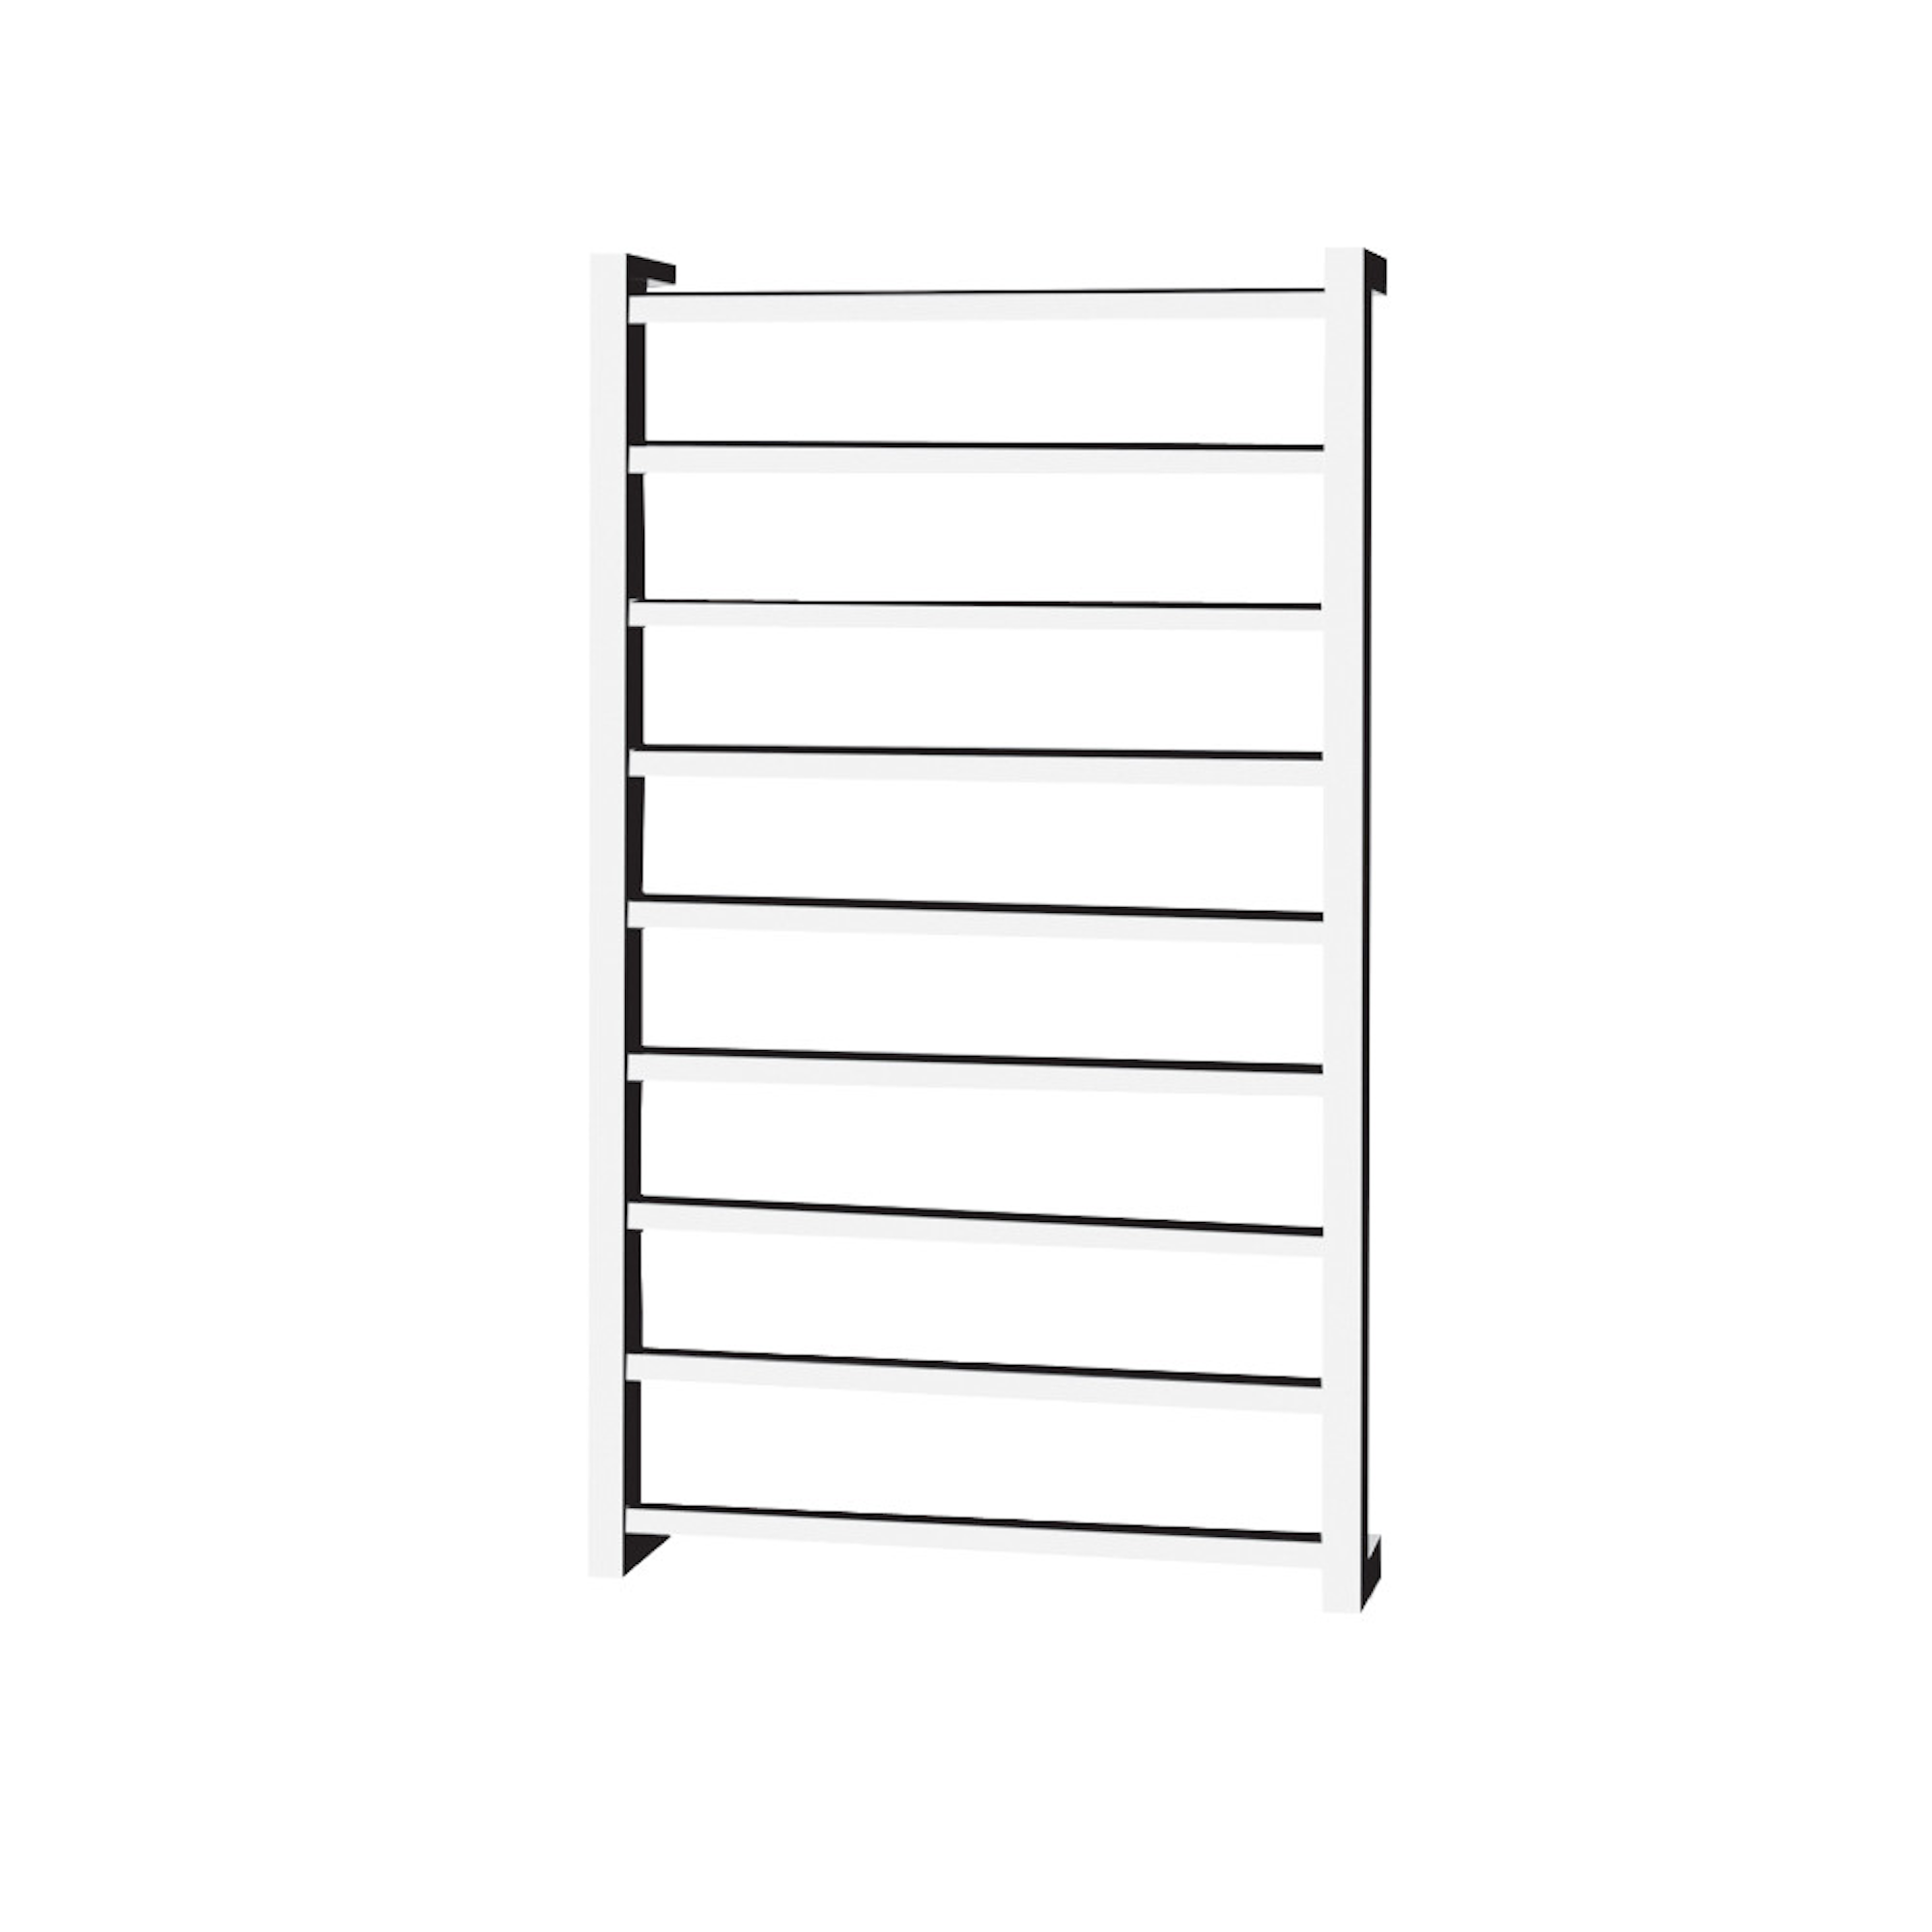 1000 x 600 dry electric towel rail - Square Tube SWITCHED